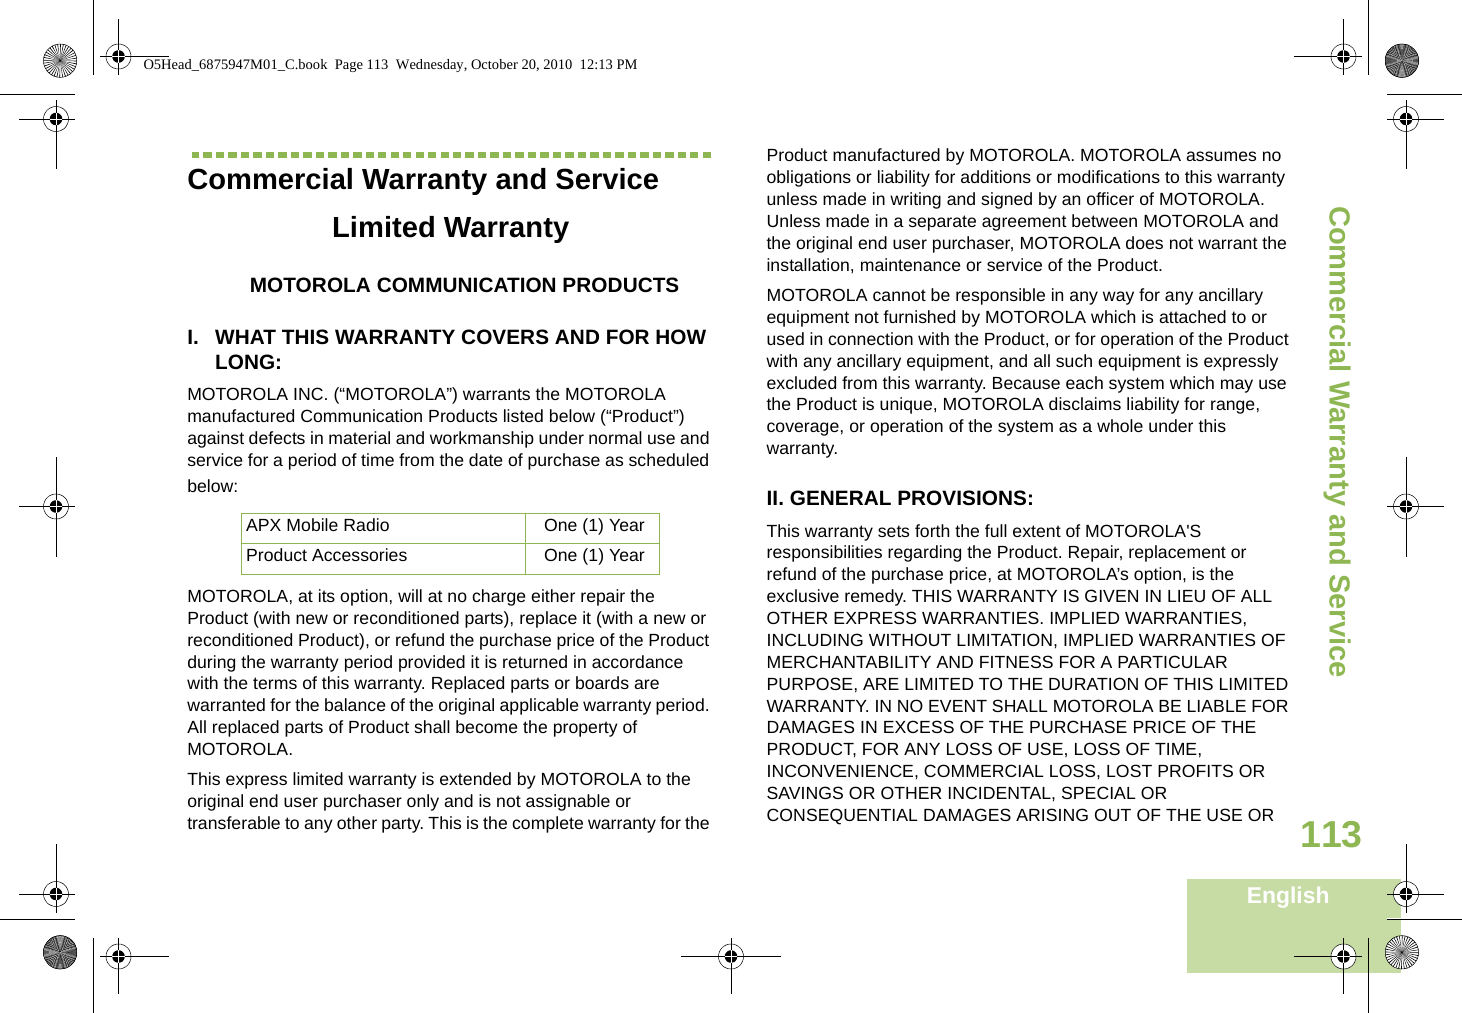 Commercial Warranty and ServiceEnglish113Commercial Warranty and ServiceLimited WarrantyMOTOROLA COMMUNICATION PRODUCTSI. WHAT THIS WARRANTY COVERS AND FOR HOW LONG:MOTOROLA INC. (“MOTOROLA”) warrants the MOTOROLA manufactured Communication Products listed below (“Product”) against defects in material and workmanship under normal use and service for a period of time from the date of purchase as scheduled below:MOTOROLA, at its option, will at no charge either repair the Product (with new or reconditioned parts), replace it (with a new or reconditioned Product), or refund the purchase price of the Product during the warranty period provided it is returned in accordance with the terms of this warranty. Replaced parts or boards are warranted for the balance of the original applicable warranty period. All replaced parts of Product shall become the property of MOTOROLA.This express limited warranty is extended by MOTOROLA to the original end user purchaser only and is not assignable or transferable to any other party. This is the complete warranty for the Product manufactured by MOTOROLA. MOTOROLA assumes no obligations or liability for additions or modifications to this warranty unless made in writing and signed by an officer of MOTOROLA. Unless made in a separate agreement between MOTOROLA and the original end user purchaser, MOTOROLA does not warrant the installation, maintenance or service of the Product.MOTOROLA cannot be responsible in any way for any ancillary equipment not furnished by MOTOROLA which is attached to or used in connection with the Product, or for operation of the Product with any ancillary equipment, and all such equipment is expressly excluded from this warranty. Because each system which may use the Product is unique, MOTOROLA disclaims liability for range, coverage, or operation of the system as a whole under this warranty.II. GENERAL PROVISIONS:This warranty sets forth the full extent of MOTOROLA&apos;S responsibilities regarding the Product. Repair, replacement or refund of the purchase price, at MOTOROLA’s option, is the exclusive remedy. THIS WARRANTY IS GIVEN IN LIEU OF ALL OTHER EXPRESS WARRANTIES. IMPLIED WARRANTIES, INCLUDING WITHOUT LIMITATION, IMPLIED WARRANTIES OF MERCHANTABILITY AND FITNESS FOR A PARTICULAR PURPOSE, ARE LIMITED TO THE DURATION OF THIS LIMITED WARRANTY. IN NO EVENT SHALL MOTOROLA BE LIABLE FOR DAMAGES IN EXCESS OF THE PURCHASE PRICE OF THE PRODUCT, FOR ANY LOSS OF USE, LOSS OF TIME, INCONVENIENCE, COMMERCIAL LOSS, LOST PROFITS OR SAVINGS OR OTHER INCIDENTAL, SPECIAL OR CONSEQUENTIAL DAMAGES ARISING OUT OF THE USE OR APX Mobile Radio One (1) YearProduct Accessories One (1) YearO5Head_6875947M01_C.book  Page 113  Wednesday, October 20, 2010  12:13 PM